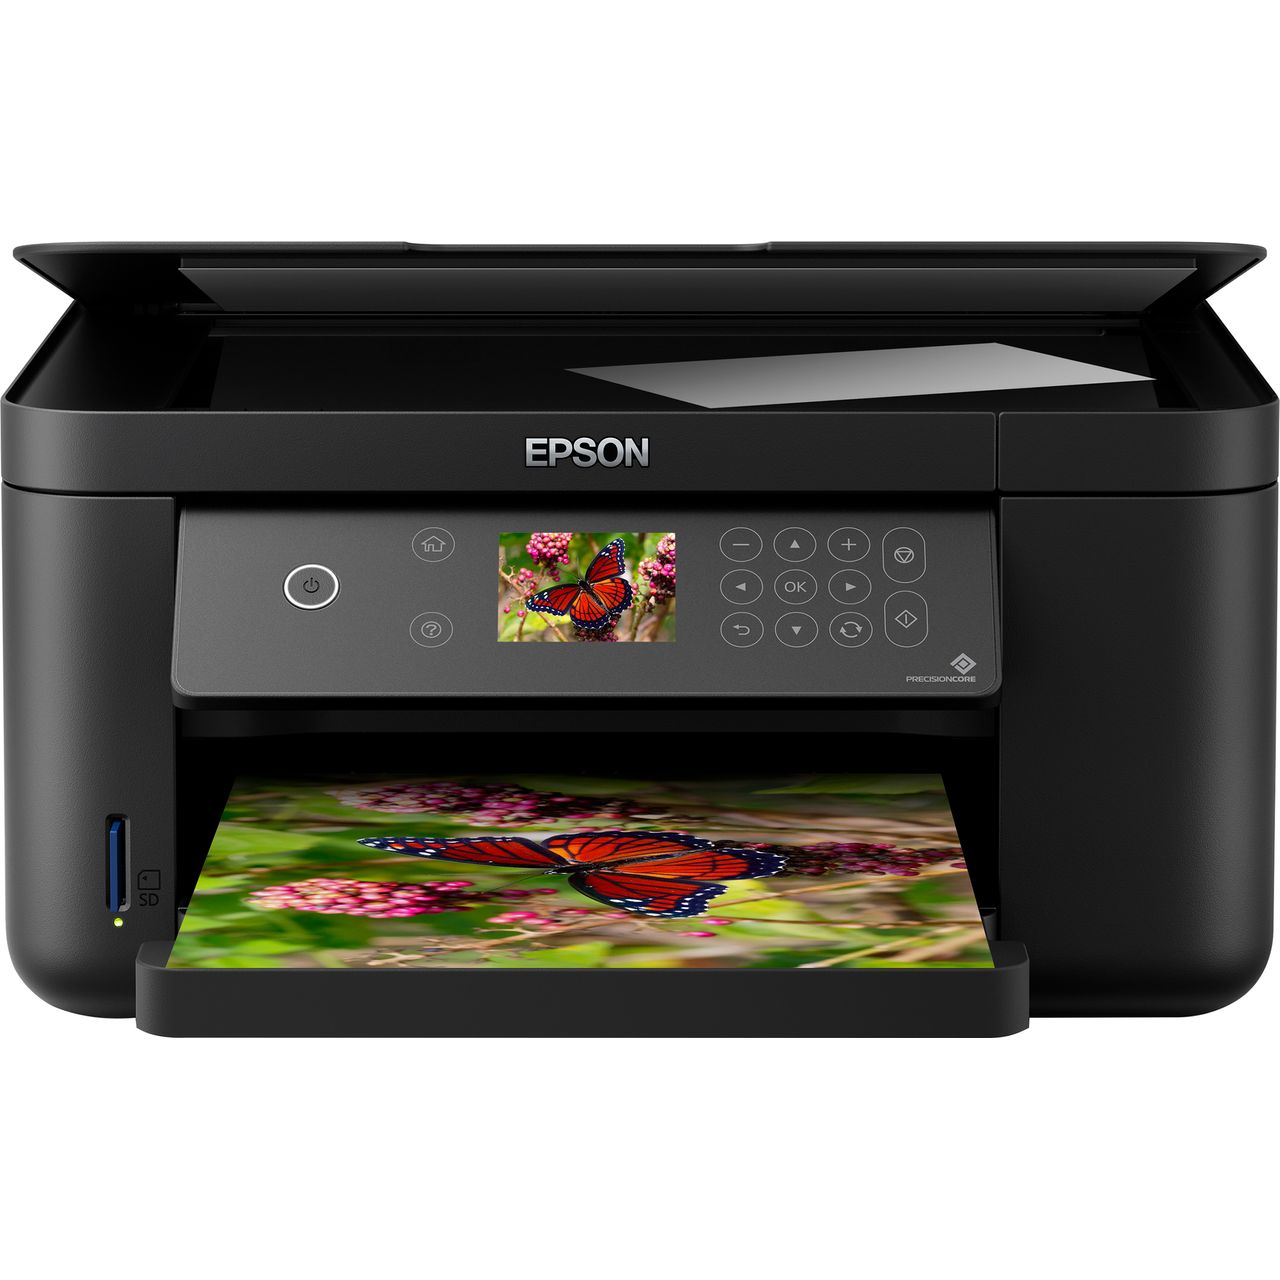 Epson Expression Home XP-5105 Inkjet Printer Review